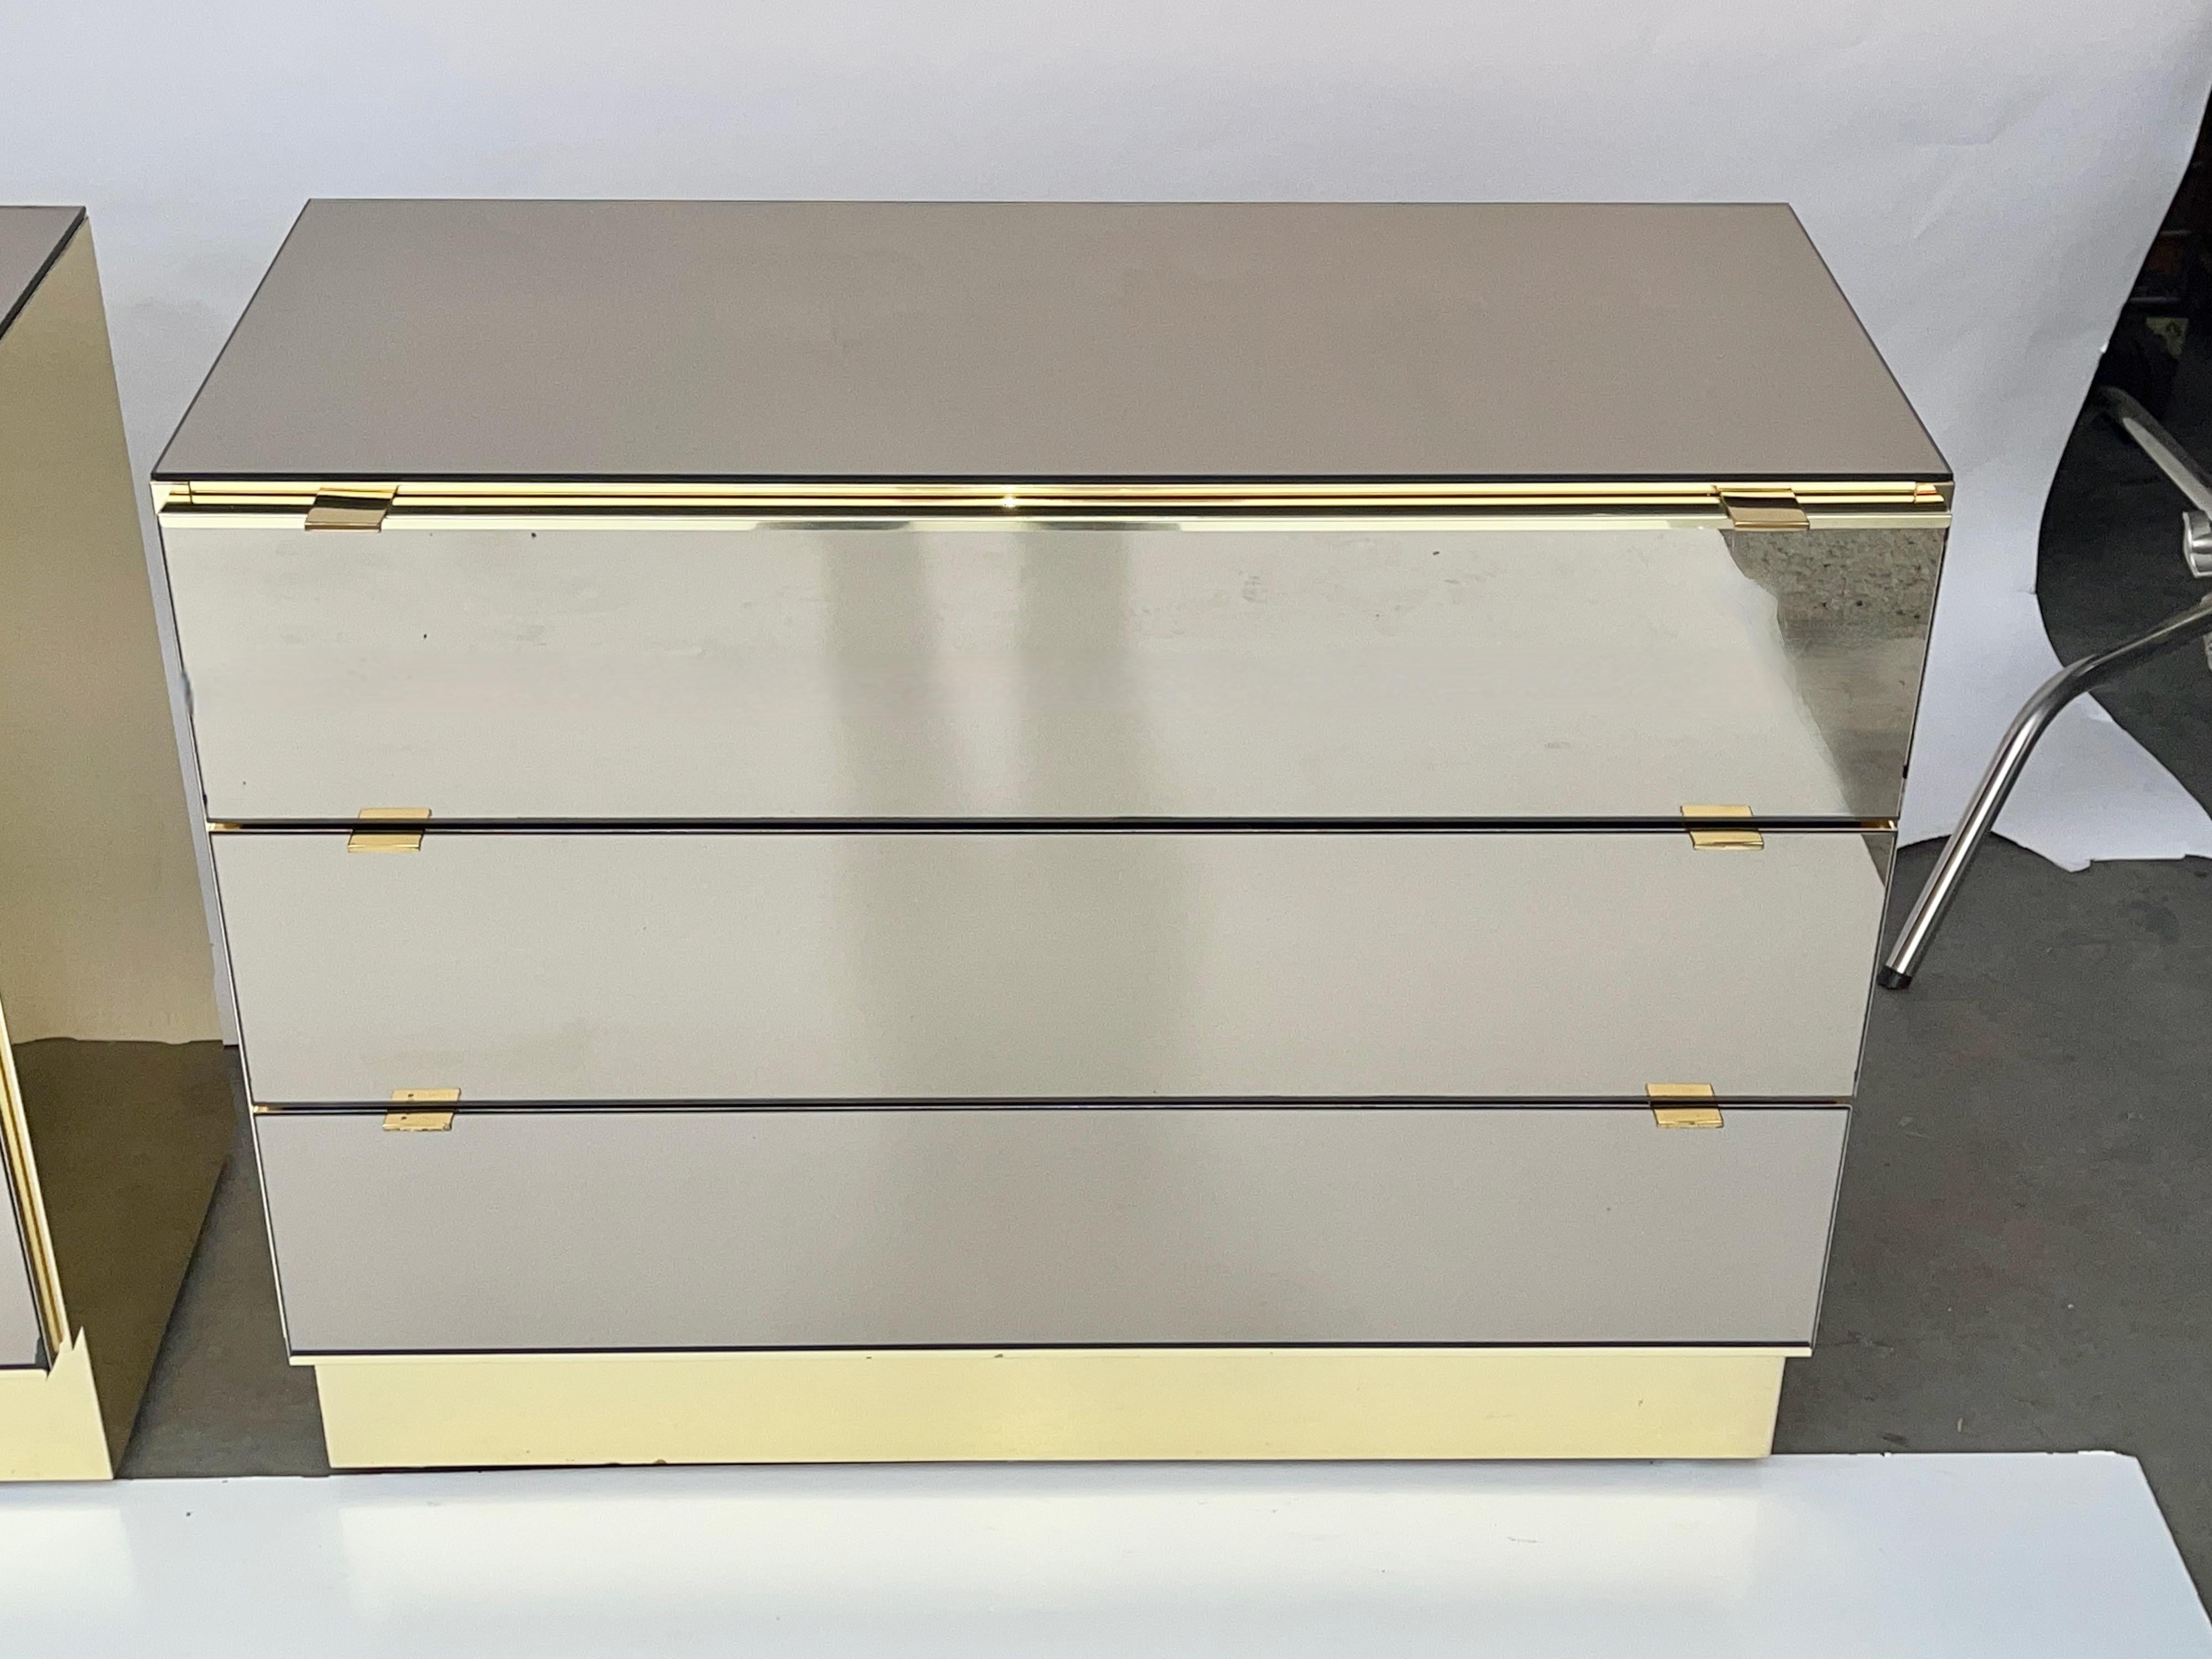 Two companion cabinets designed by O. B. Solie for Ello Furniture Manufacturing Co. clad in smoke tinted mirrored glass and polished brass tone anodized aluminum. I believe these are from their Moods II collection.
Chest of three drawers and a